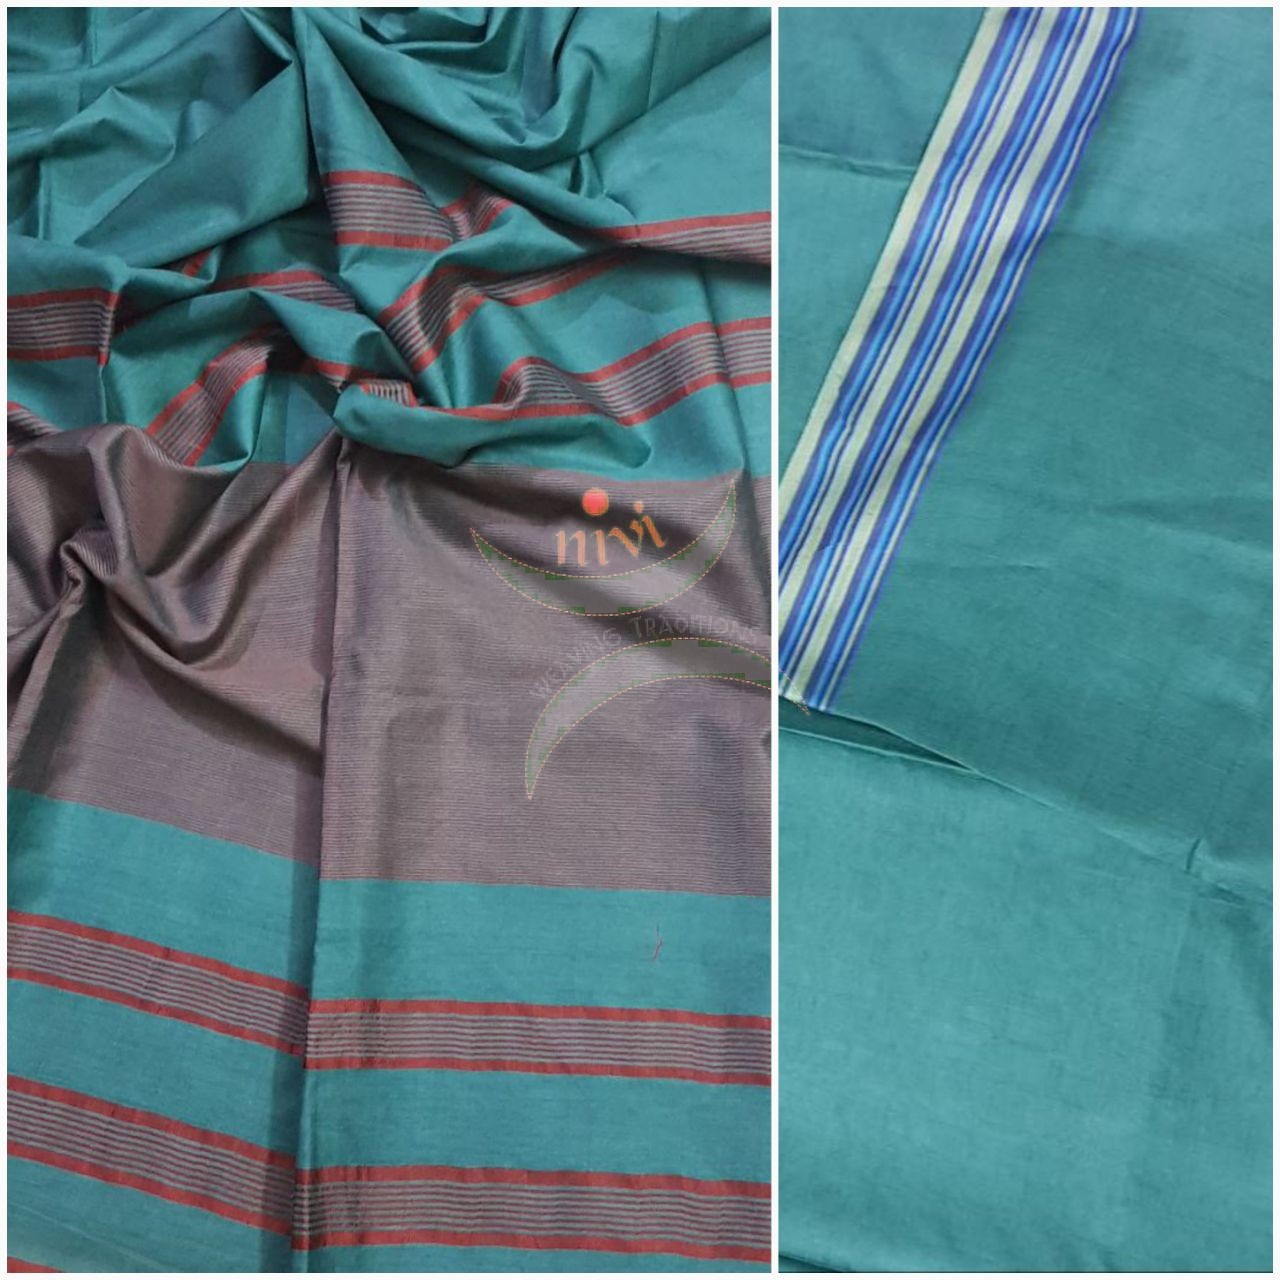 Teal bagalpuri tussar with contrasting striped border.